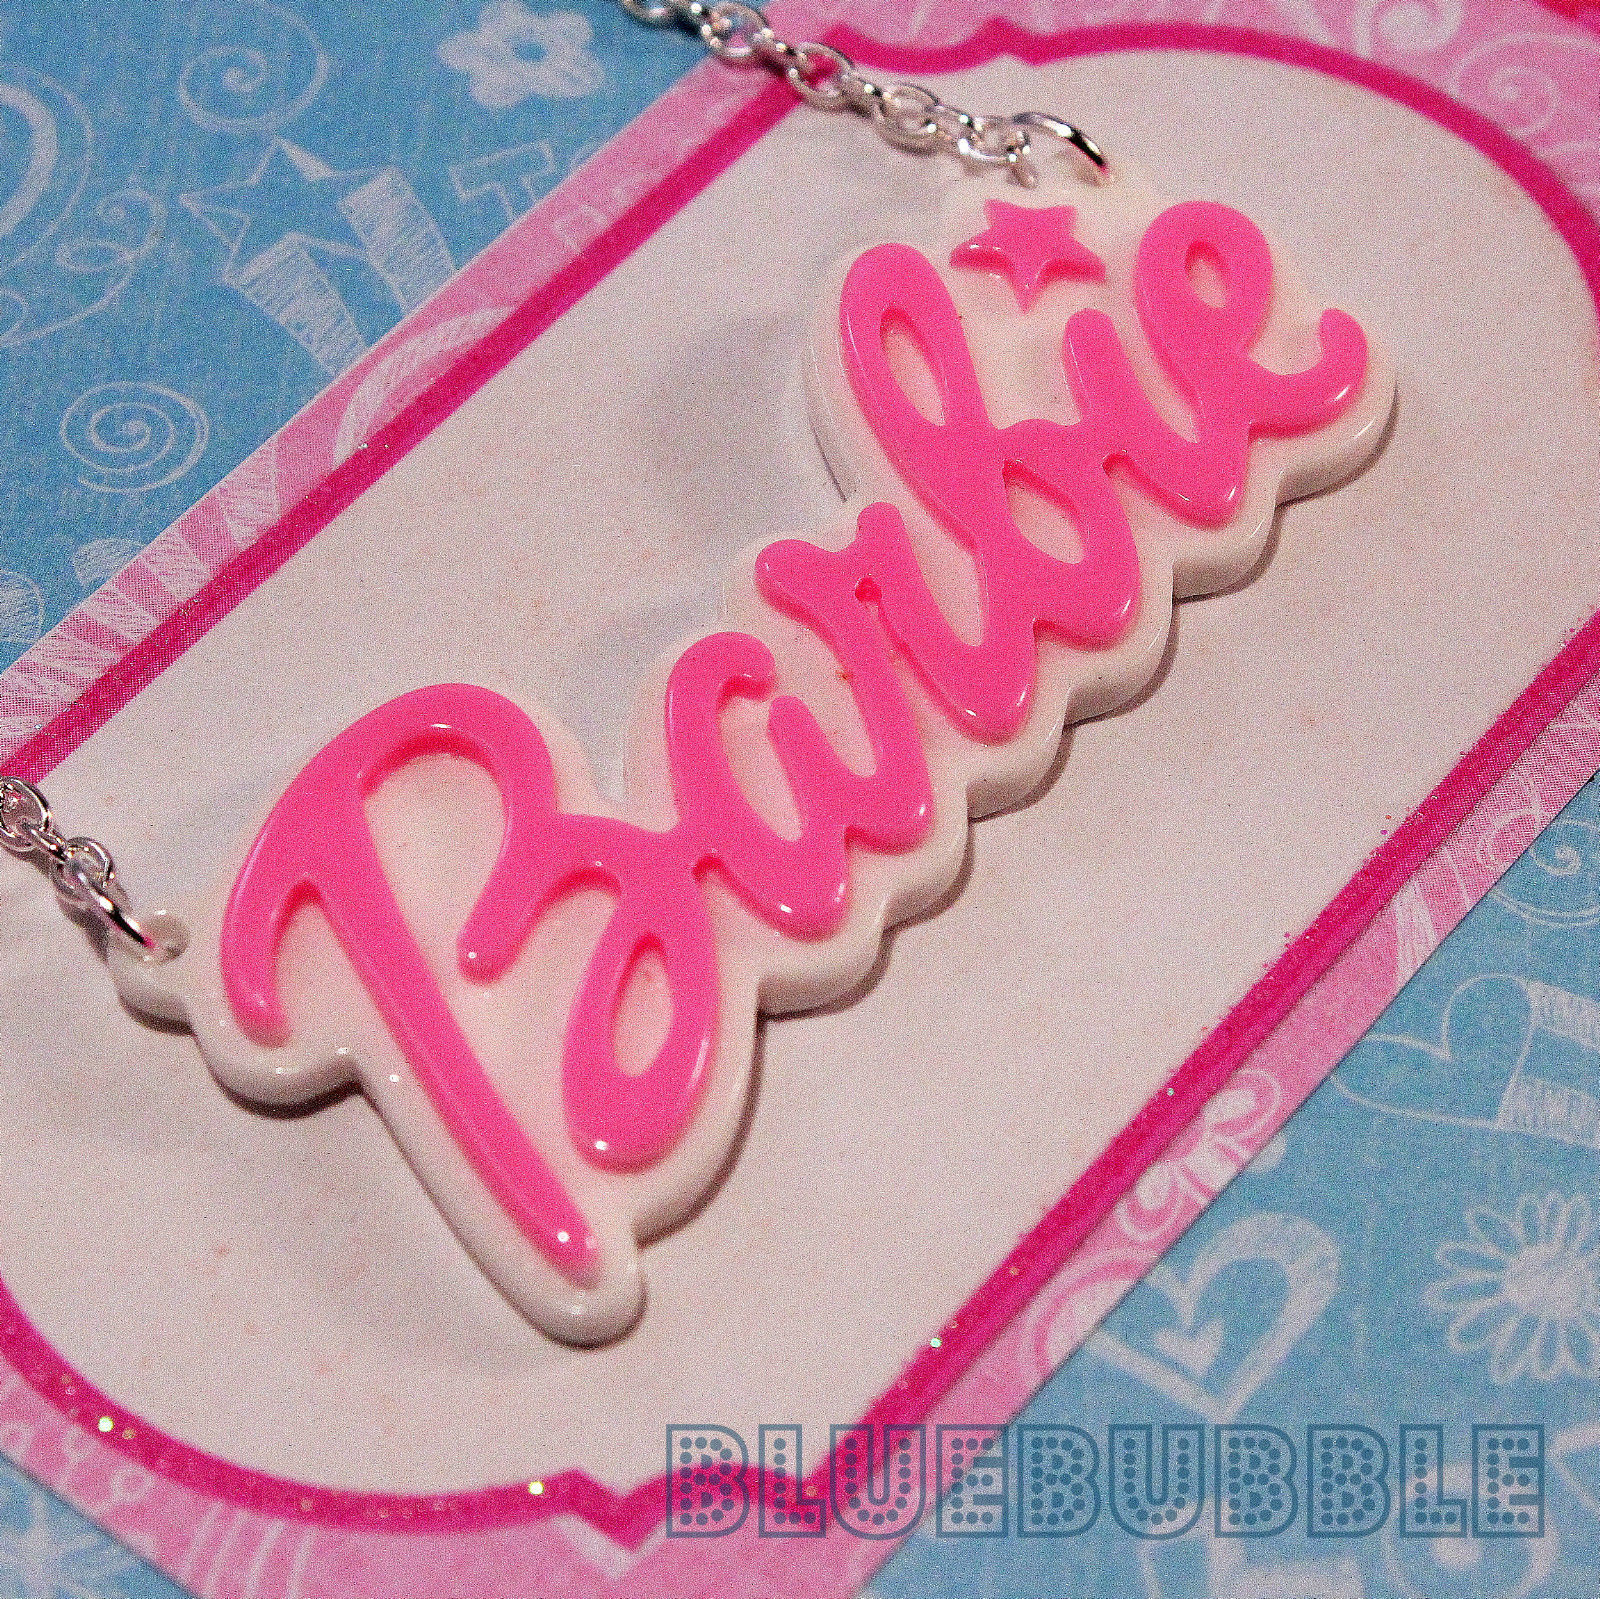 FUNKY LARGE BARBIE NAME NECKLACE CUTE KITSCH RETRO SWEET KAWAII BABY PENDANT 